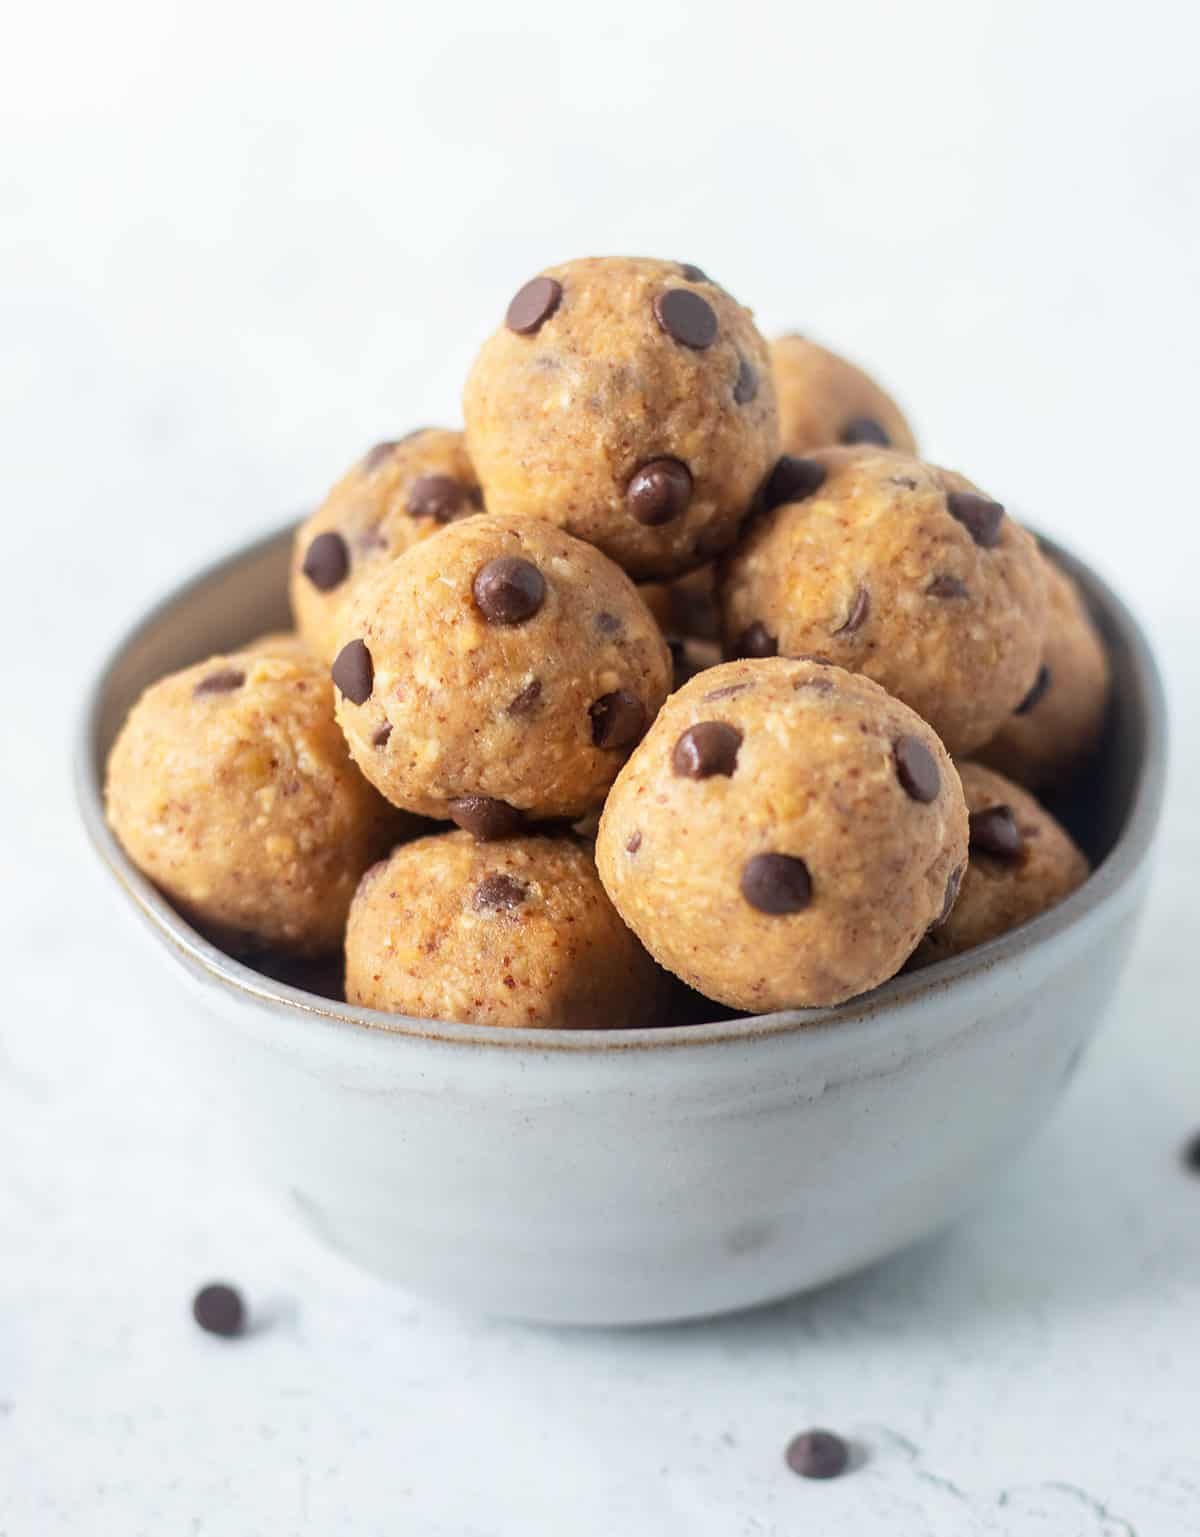 Chickpea cookie dough bites in a grey bowl that are topped with mini chocolate chips.